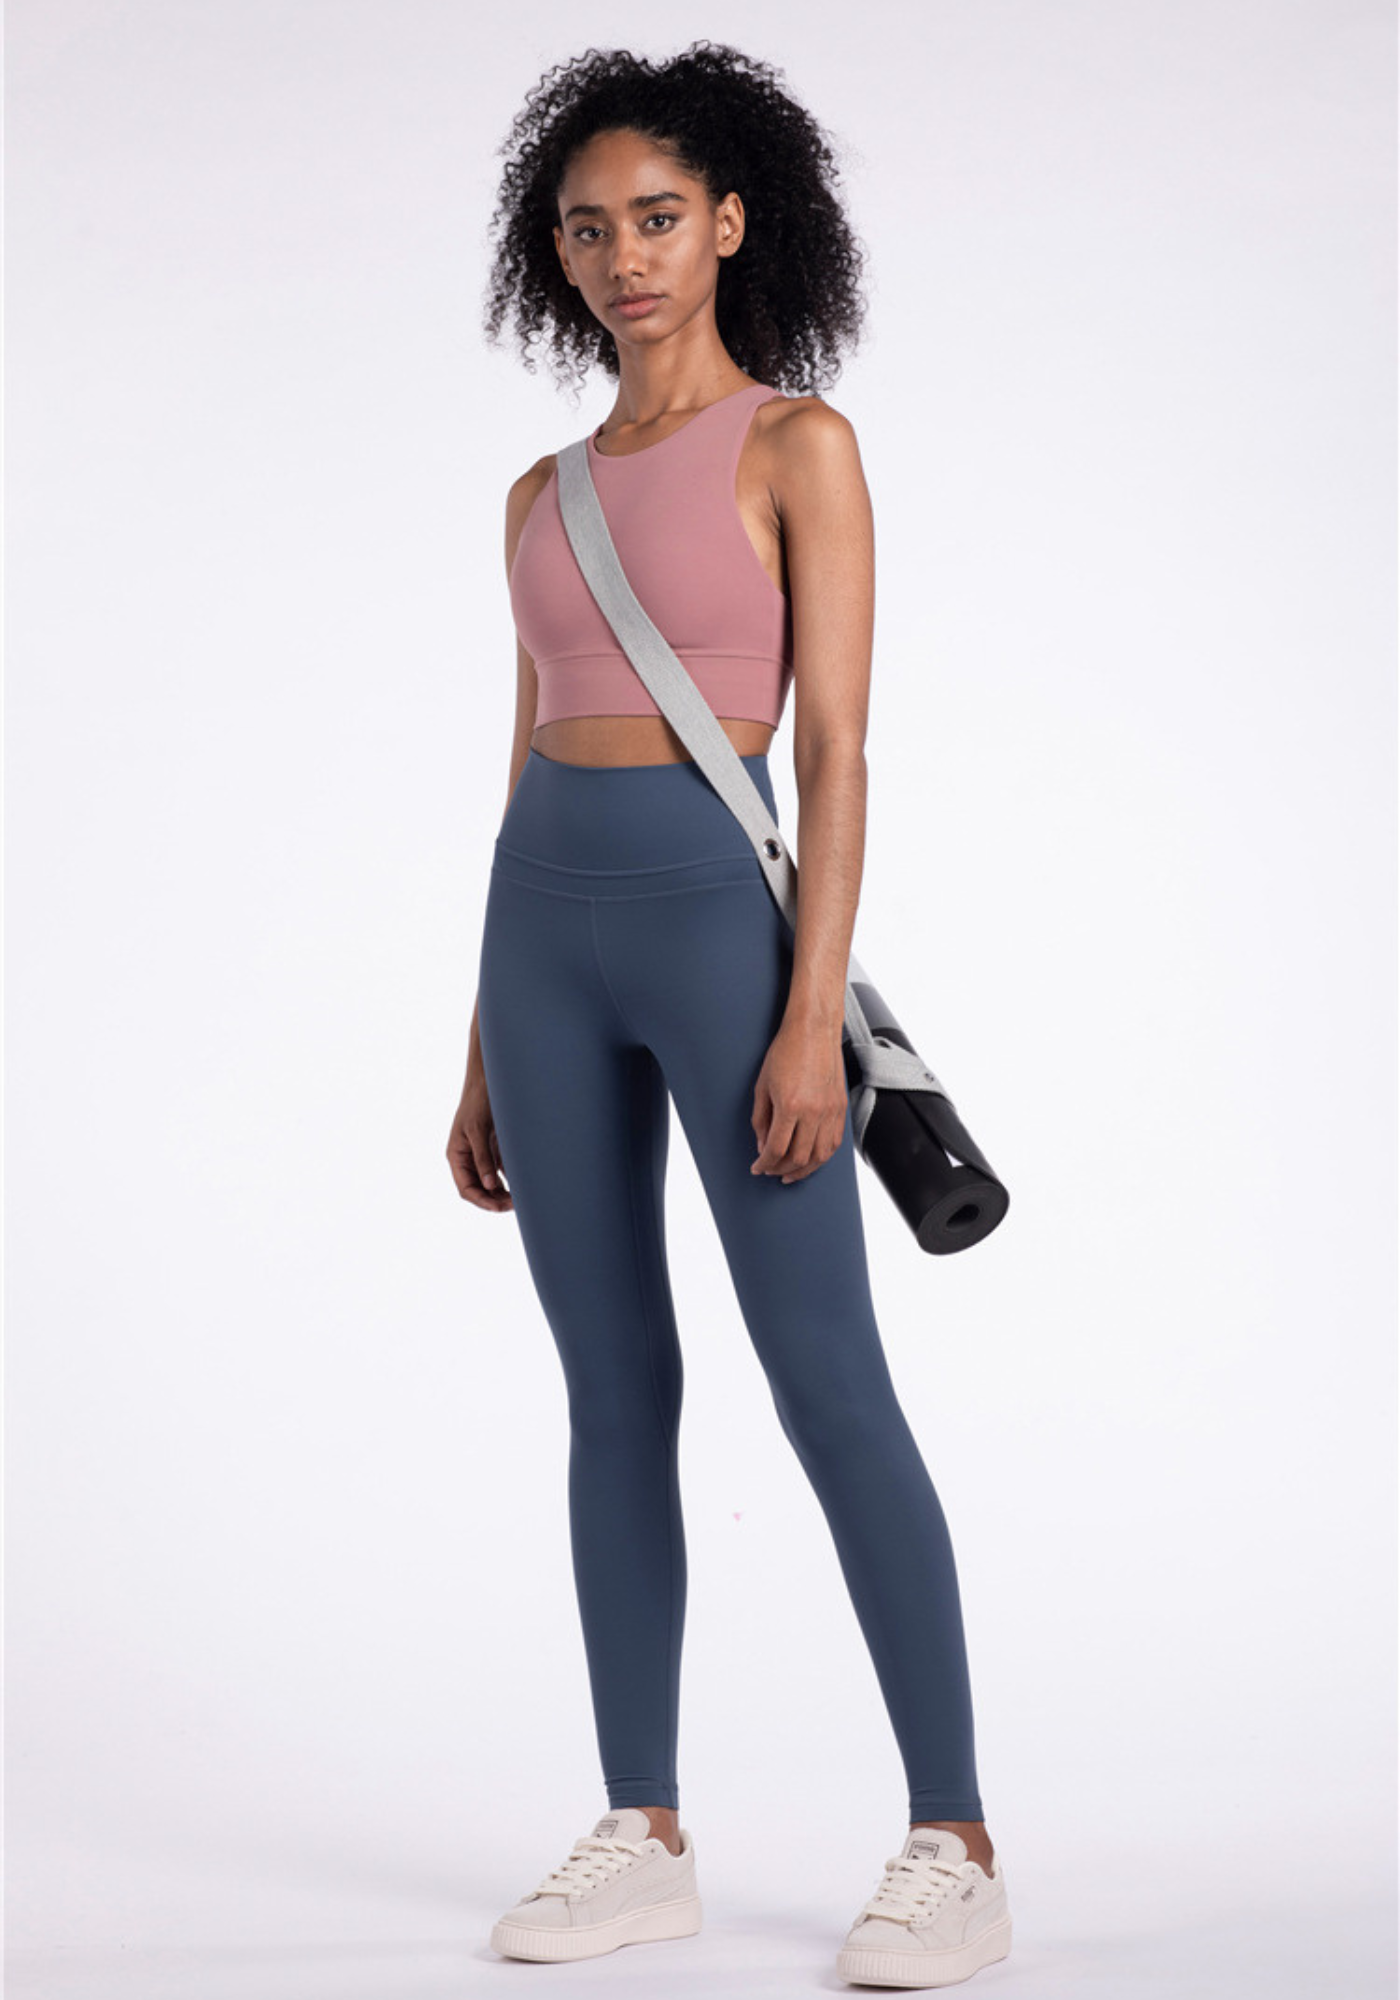 High-Waisted Sport Leggings with lifting effect PUSH UP – Women's leggings  at affordable prices from Miss Leelas